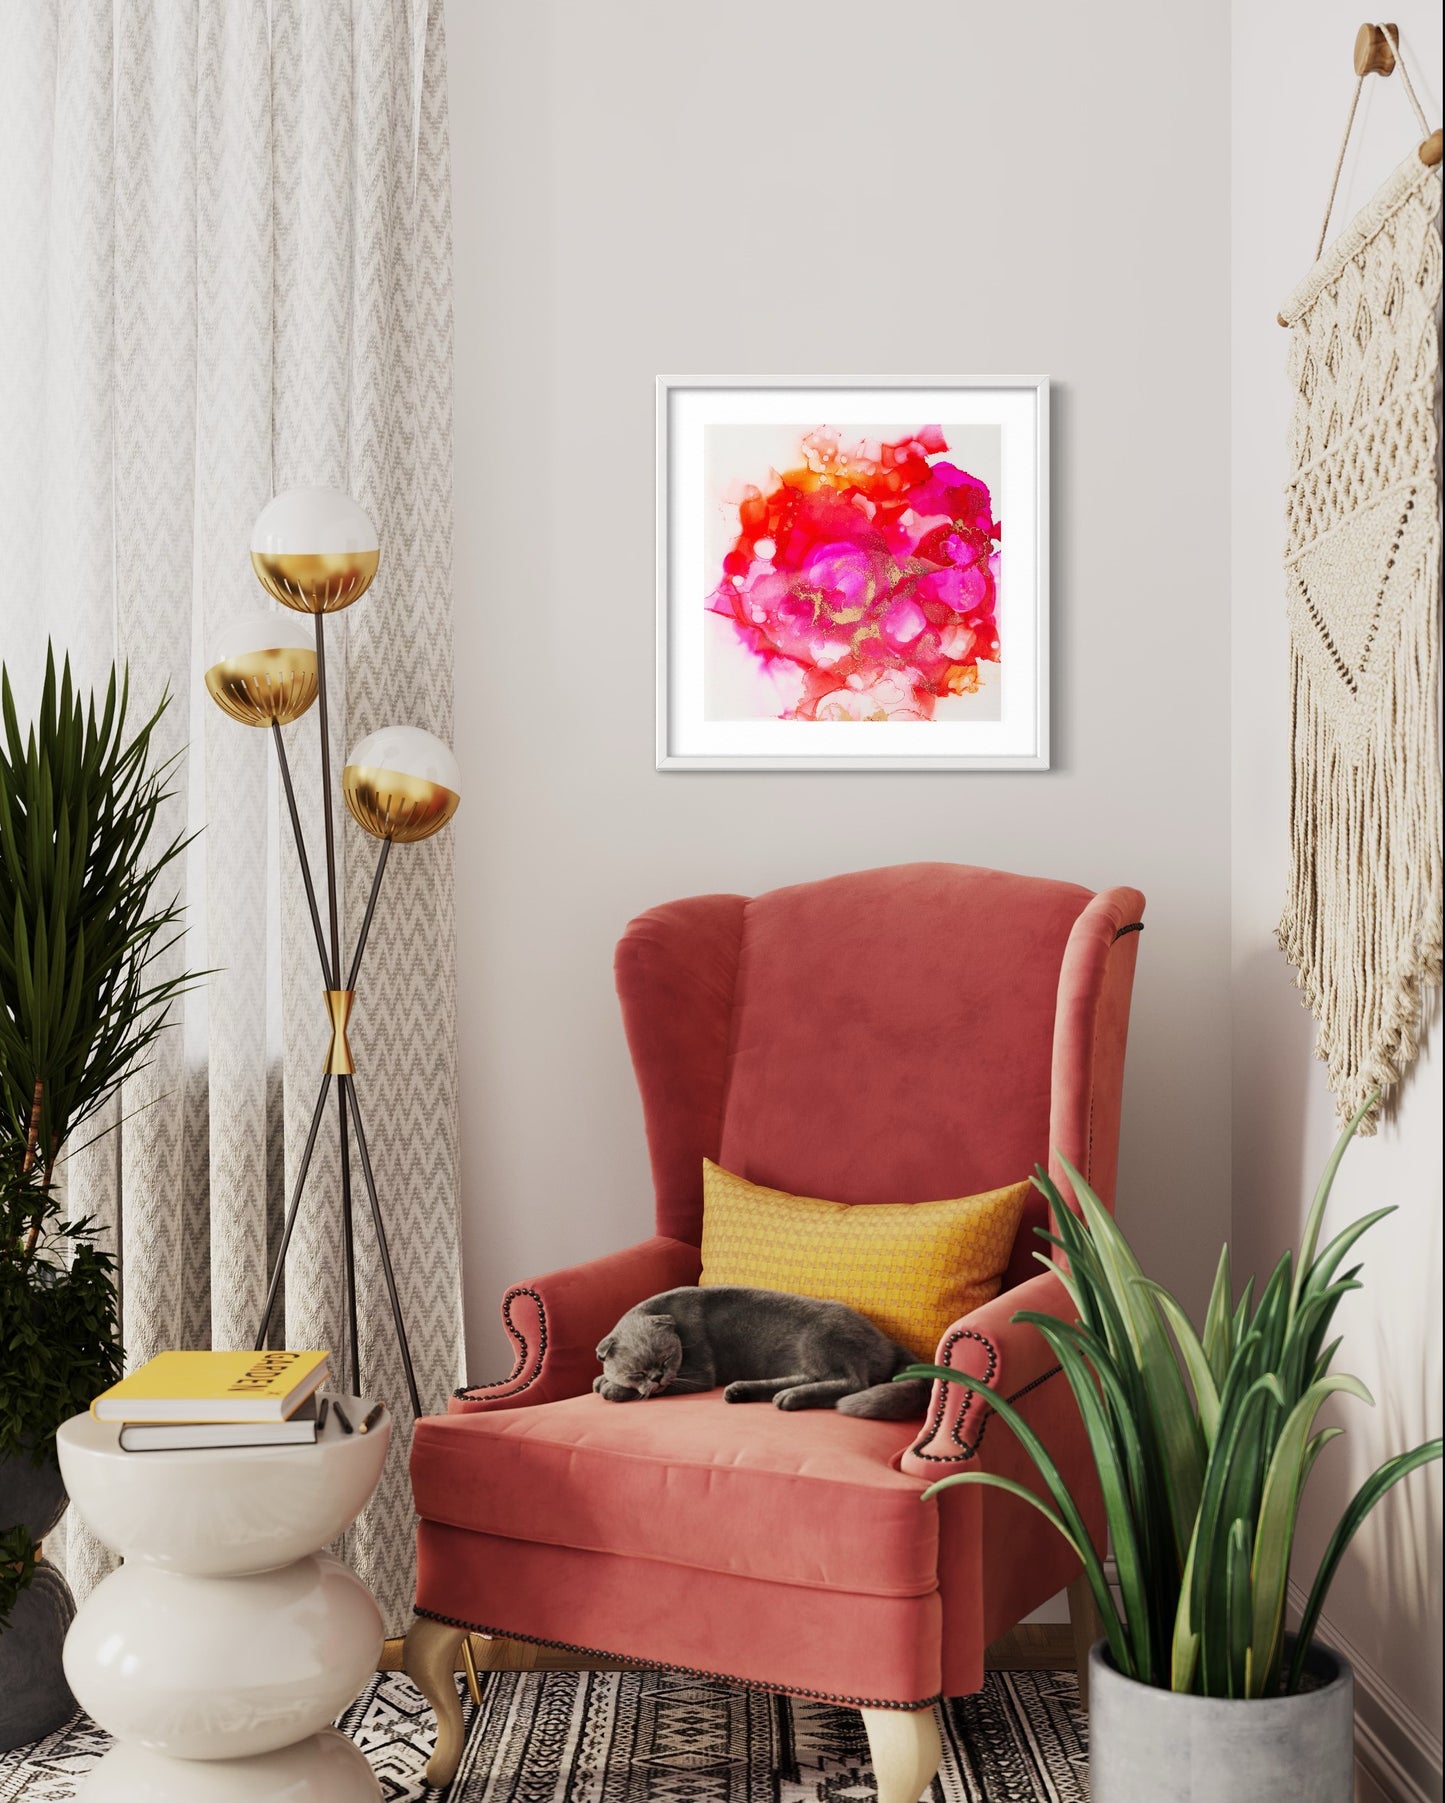 My heart knows – Framed Print - Design with Ali, LLC